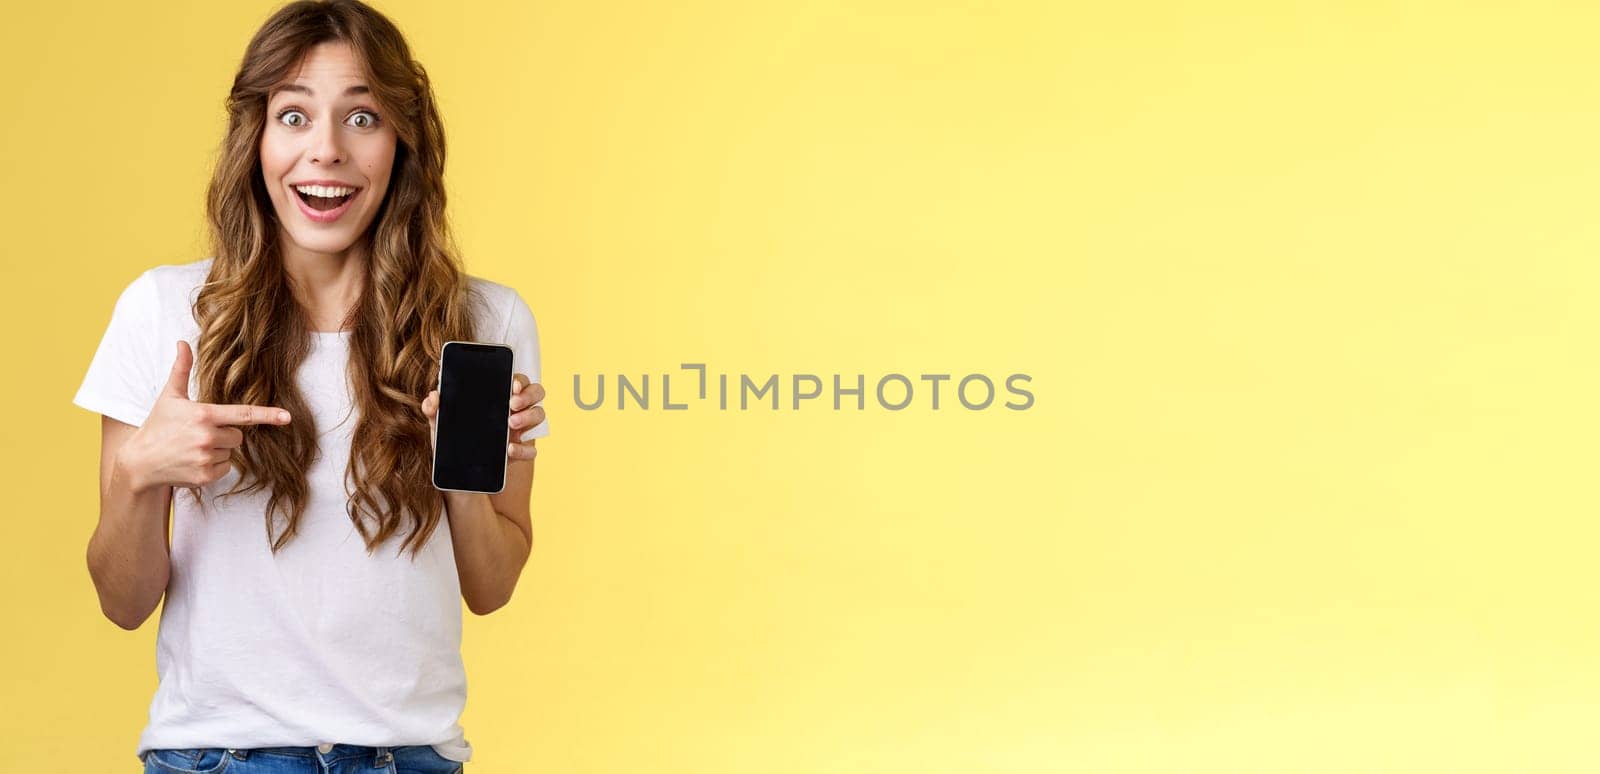 Surprised happy lucky girl winning online internet lottery smiling broadly hold smartphone pointing blank mobile phone screen showing display grinning excited enthusiastic stand yellow background.